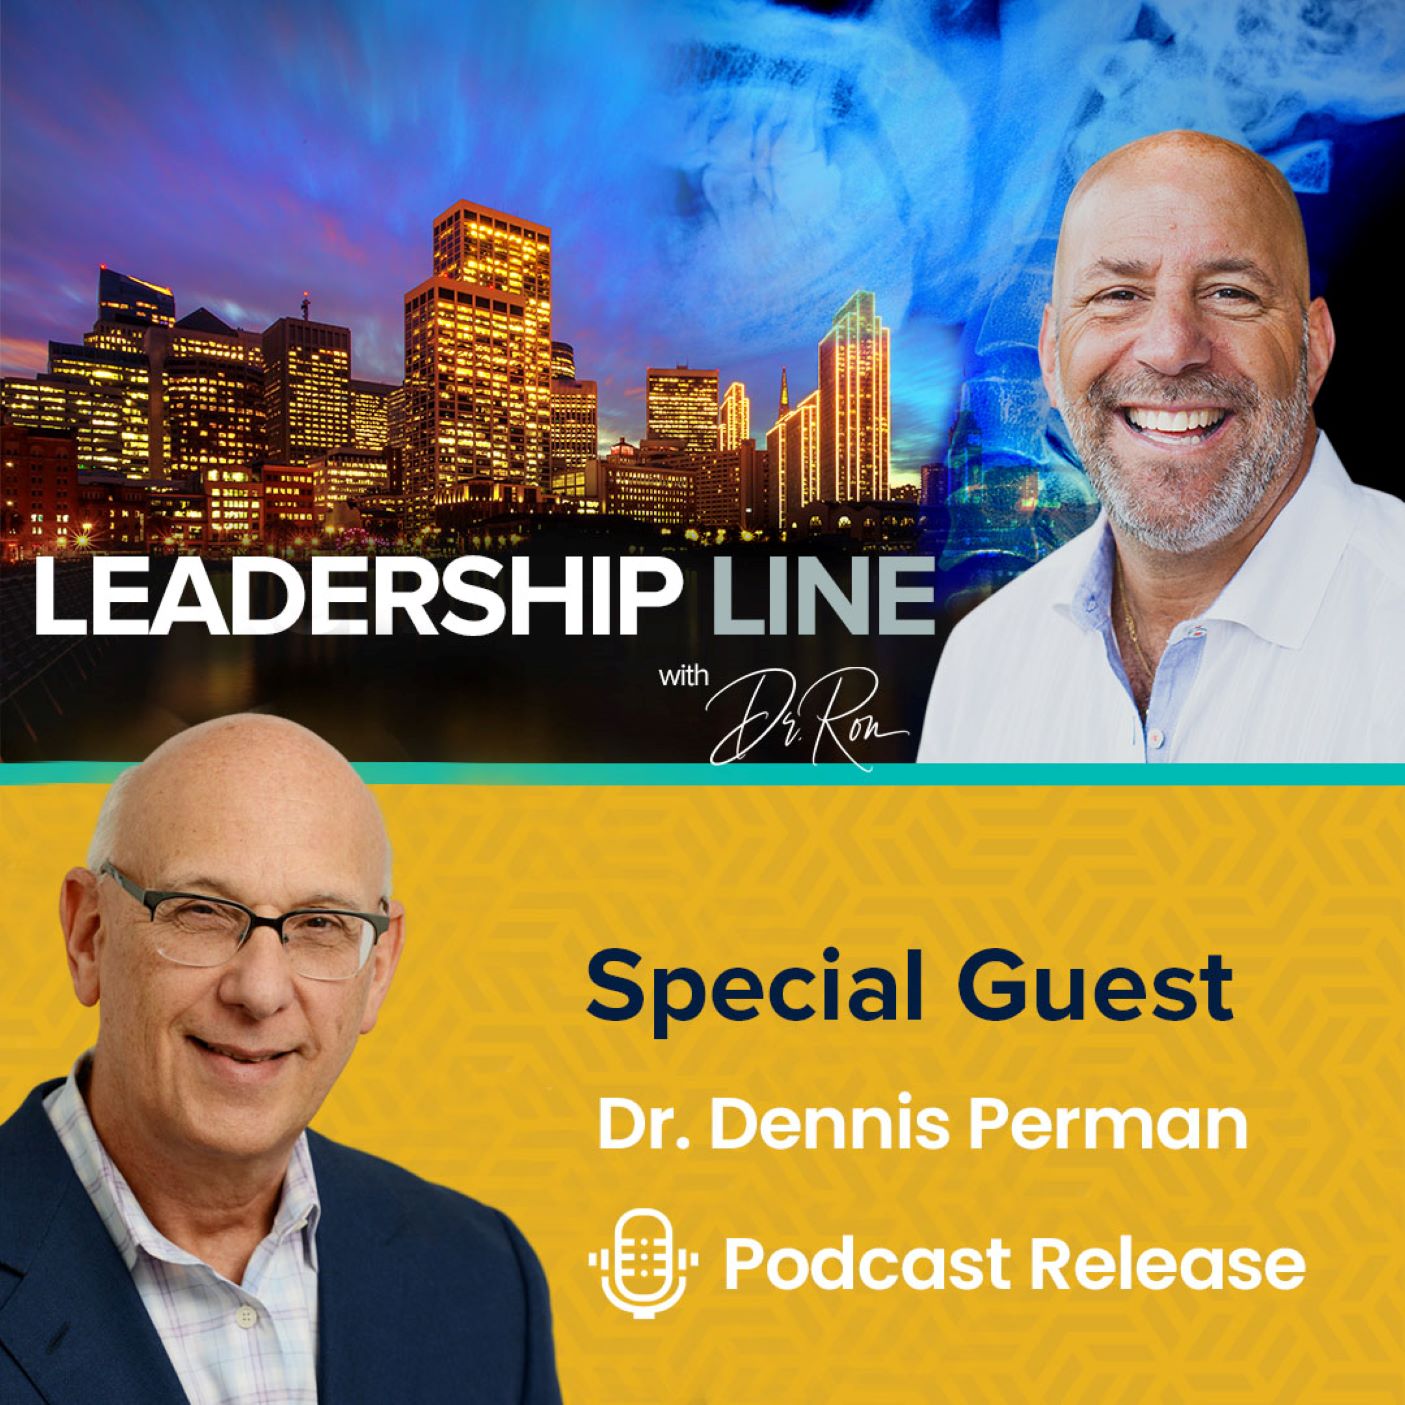 S2 Ep23 Everyone Has Their Higher Gears to Help Reach Their Highest Potential with Dr. Dennis Perman